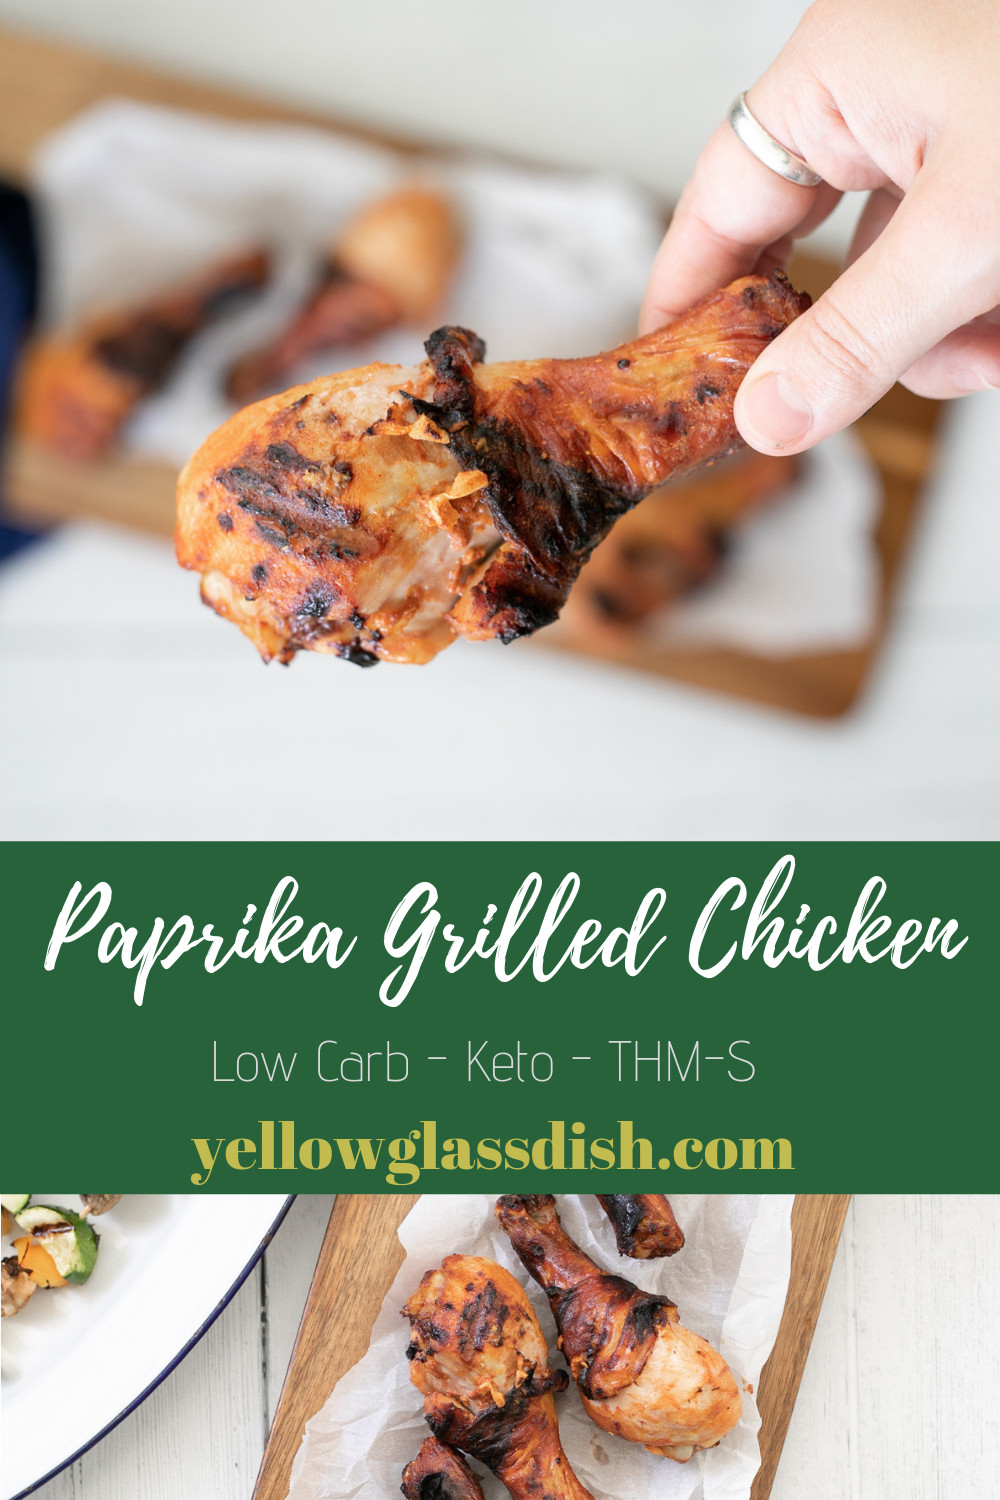 Low Carb Grilled Chicken Recipes
 Paprika Grilled Chicken Recipe